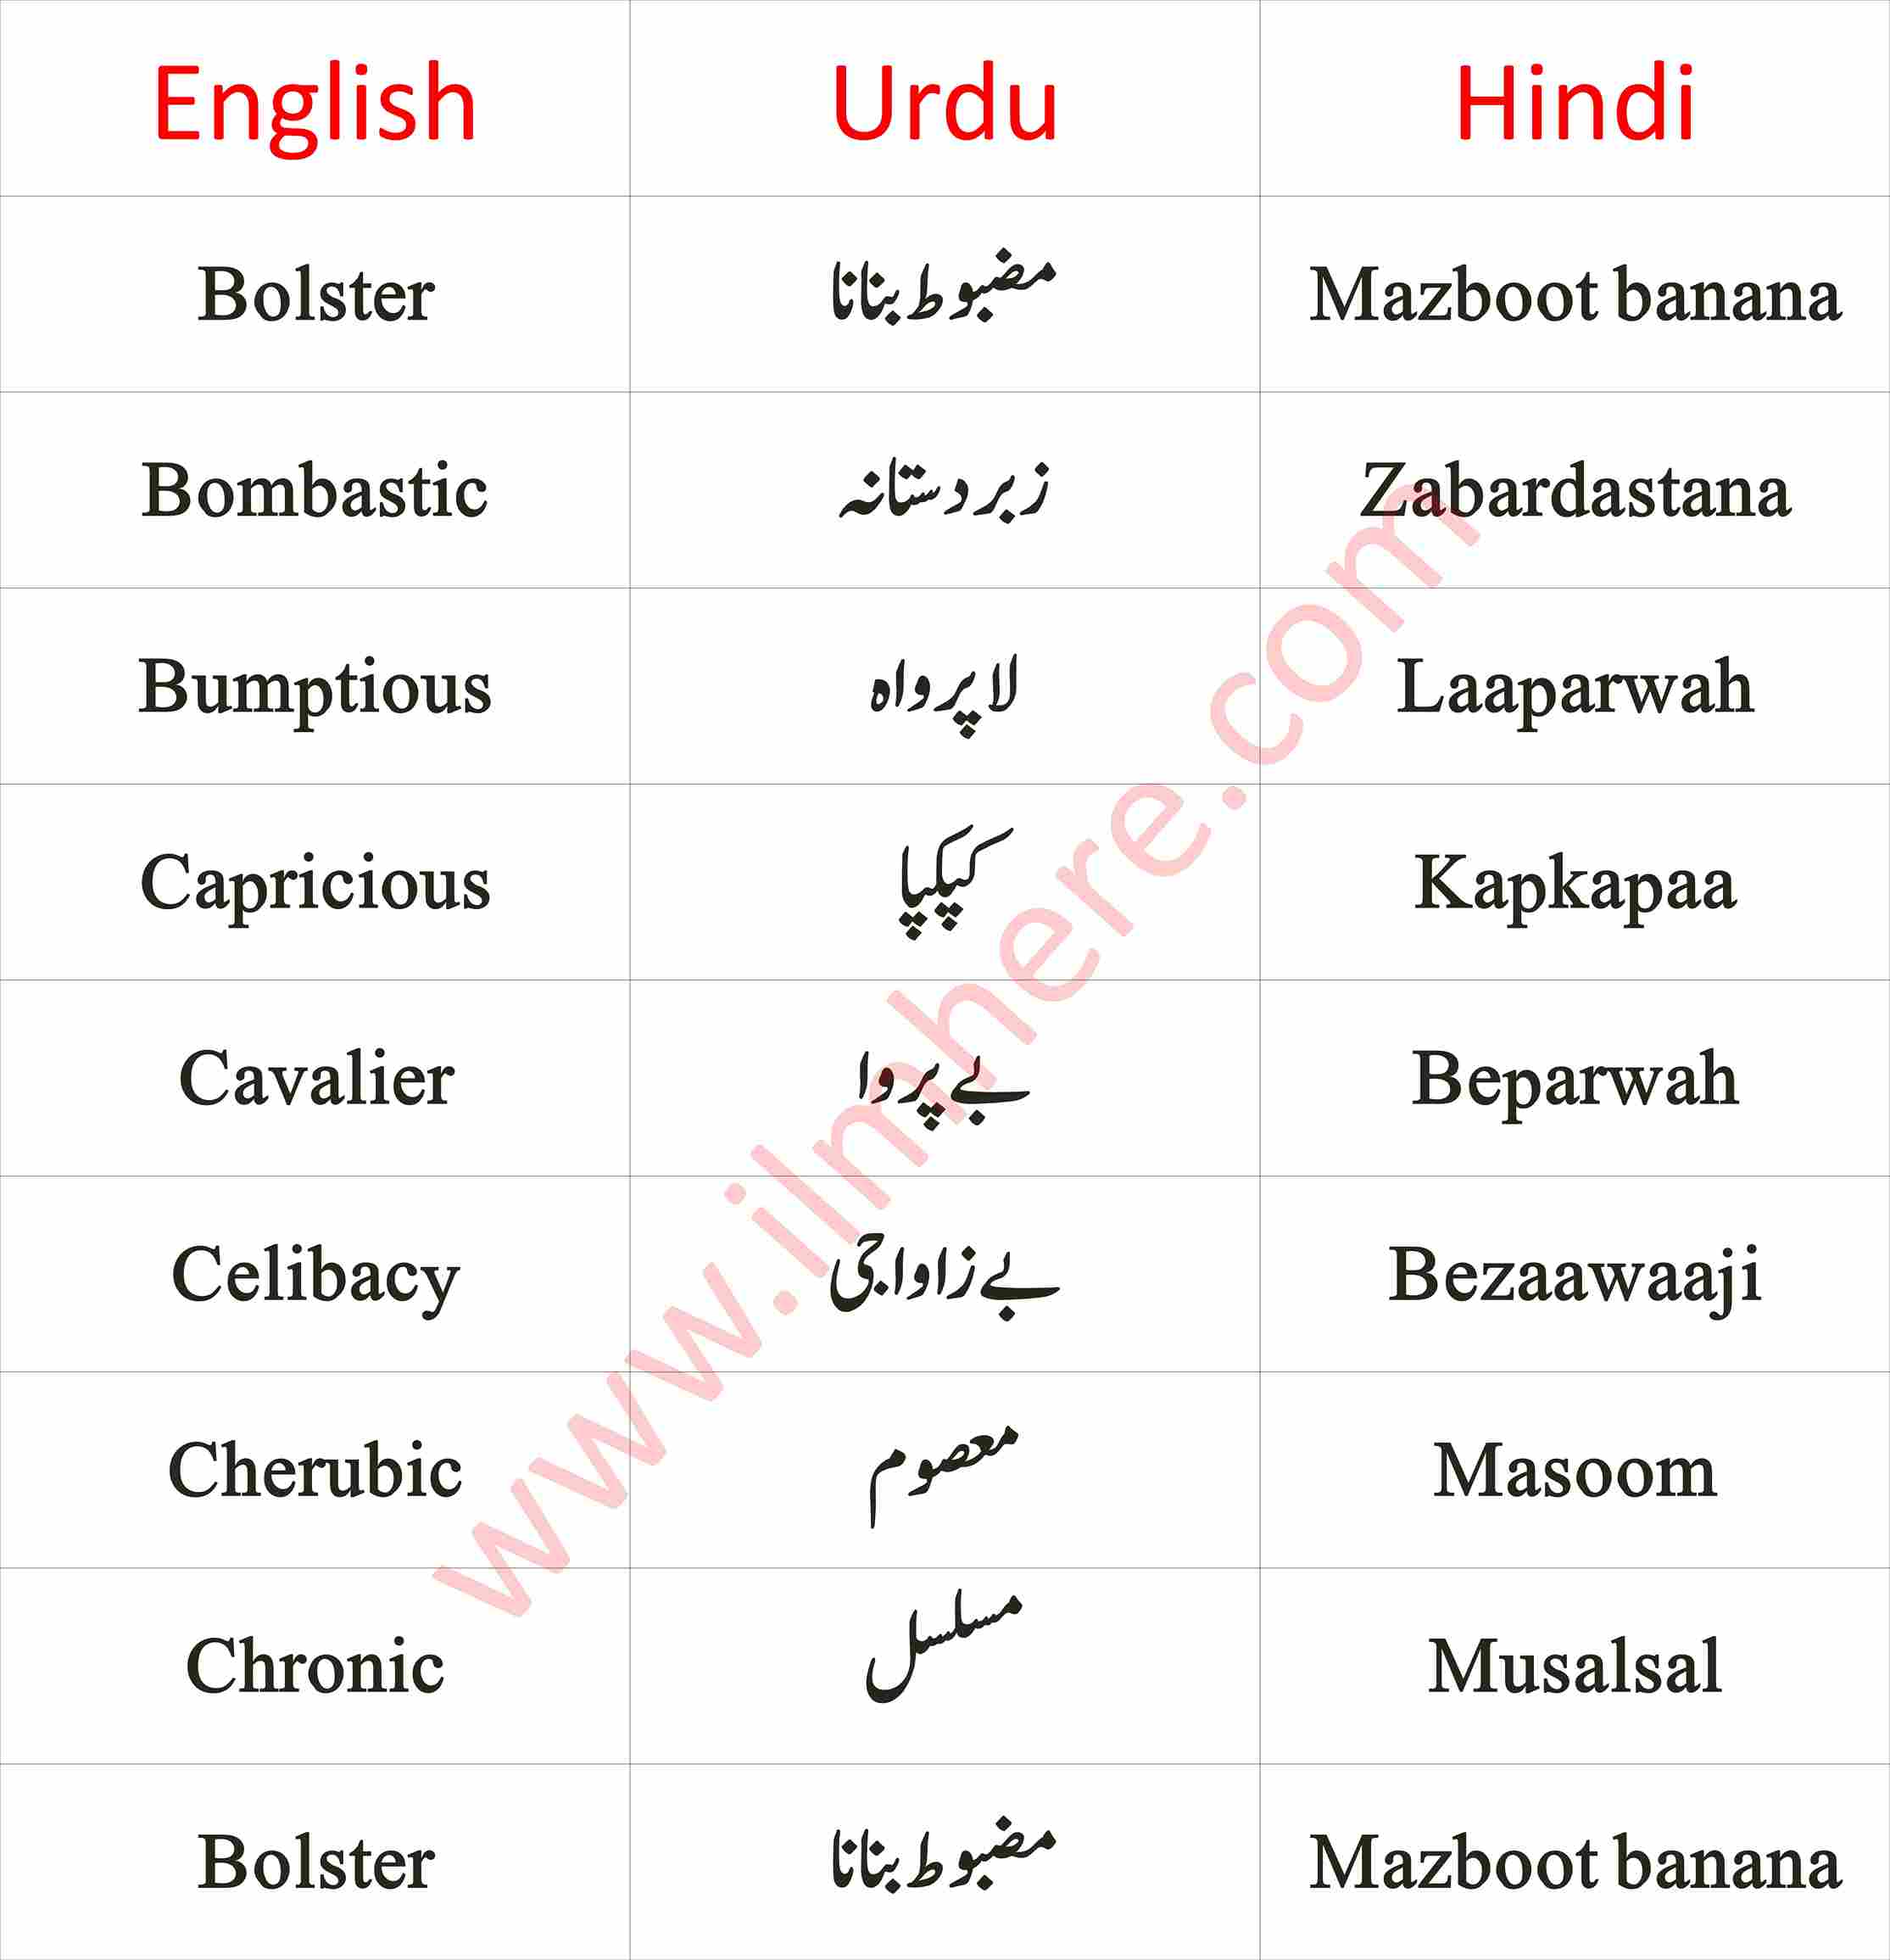 English To Urdu & Hindi Vocabulary Words for Daily Use